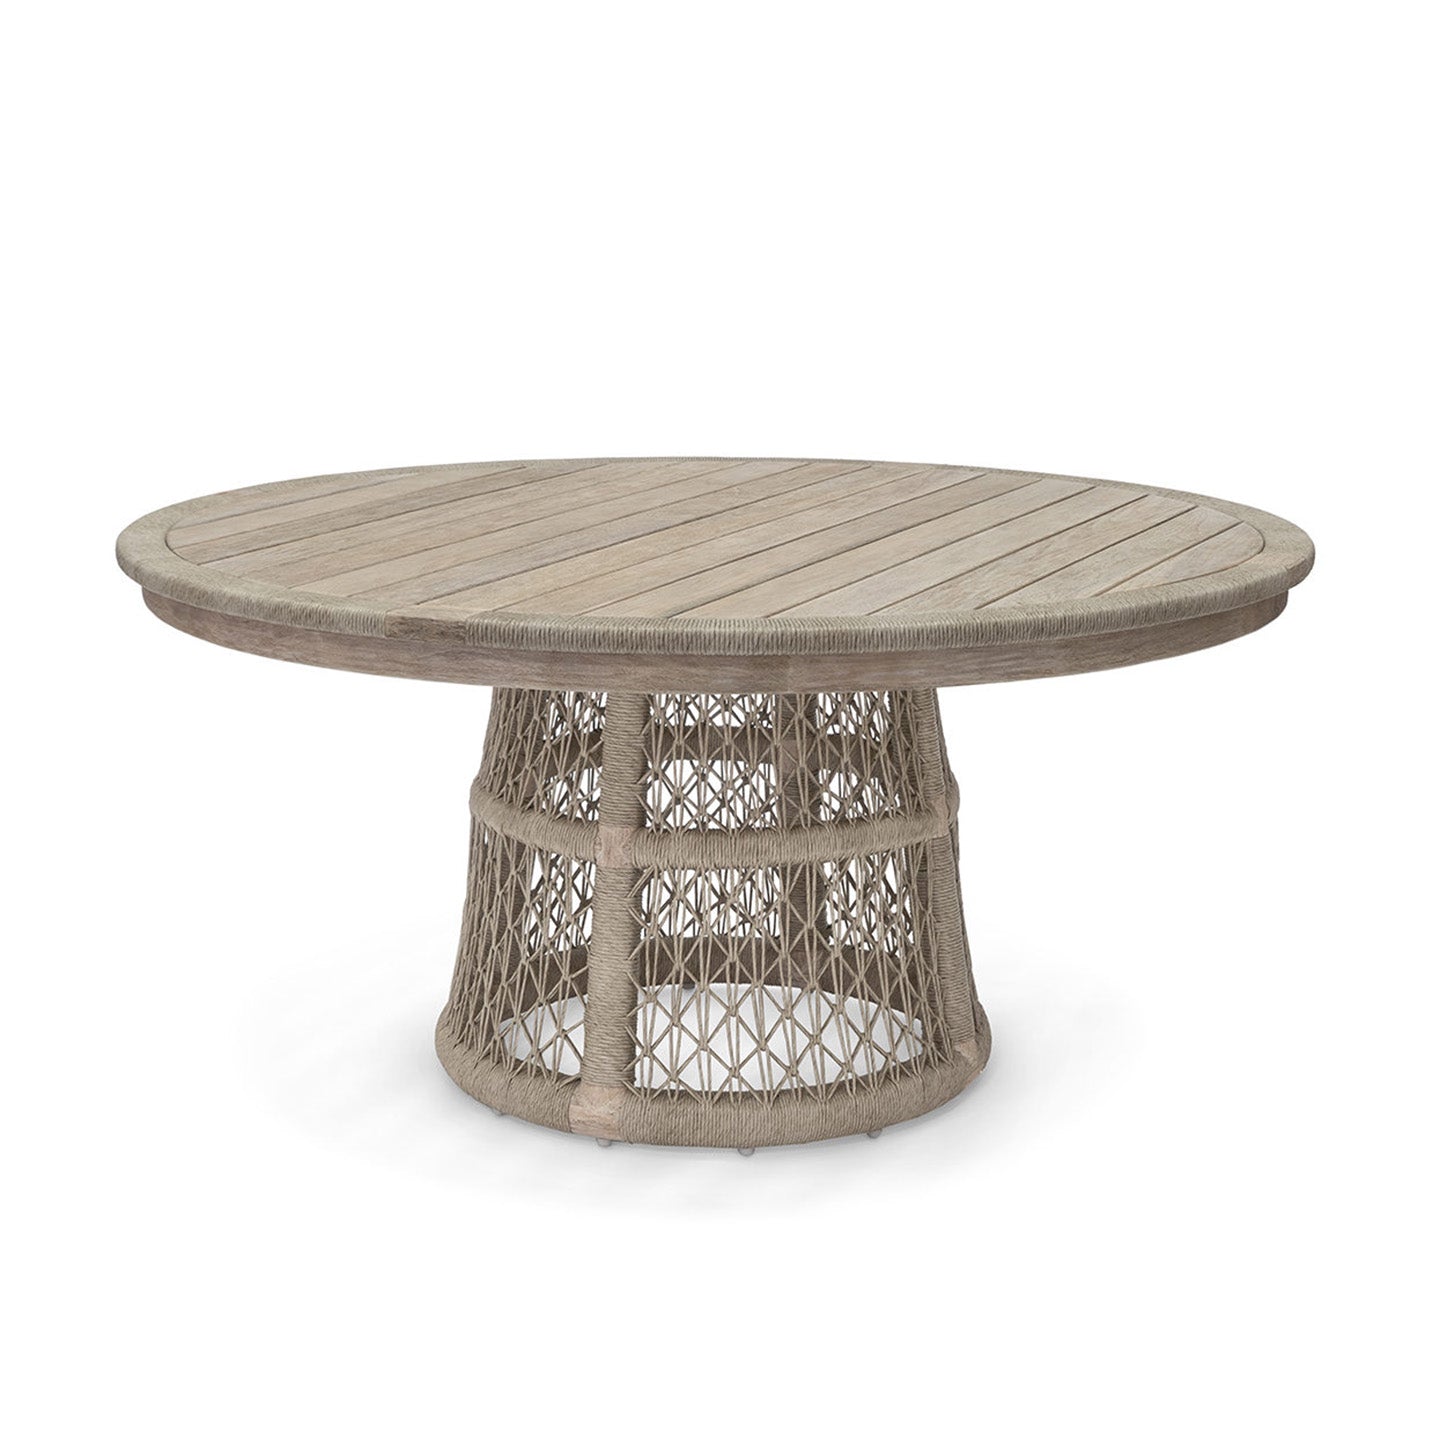 Montecito Outdoor Dining Table - Round